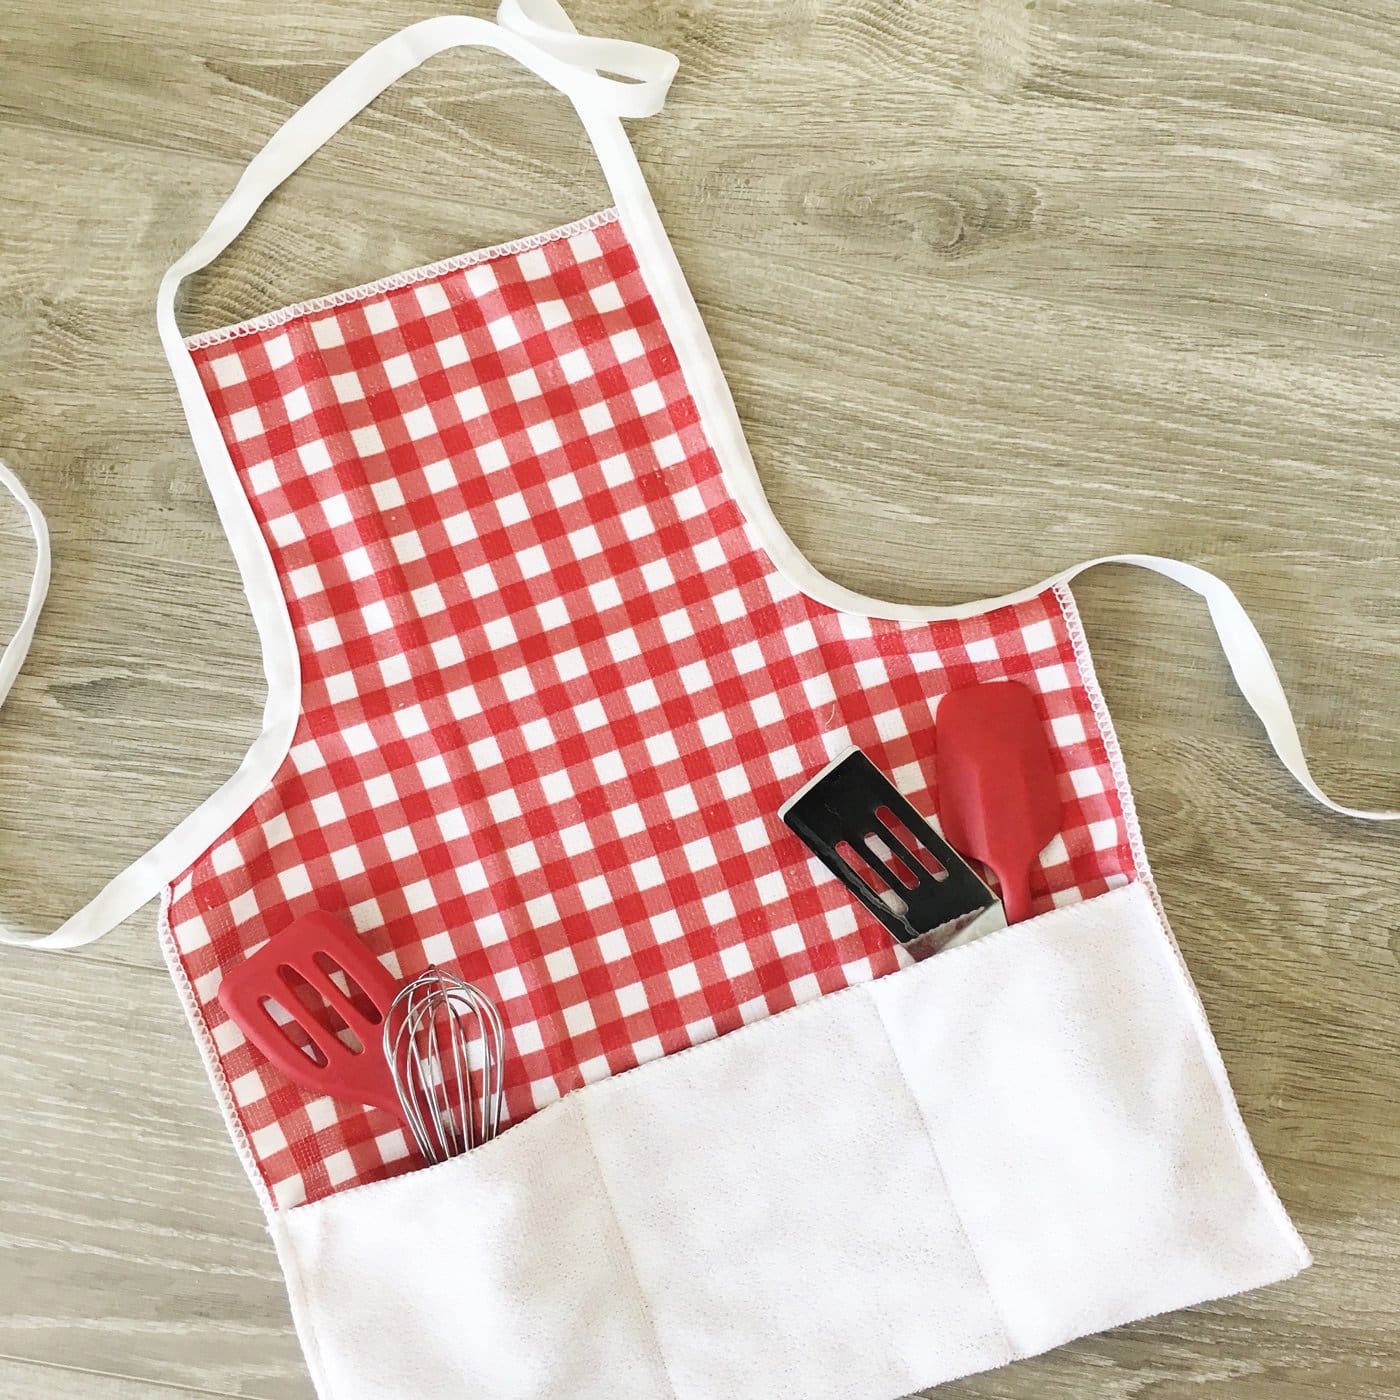 Kids BBQ Apron Pattern - a free tutorial to make a childs apron, perfect for summer! Simple kids apron pattern. #kidssewing #bbqapron #childsapron #kidsapron #sewingtutorial #sewingpattern #freesewingpattern #bbqapronpattern